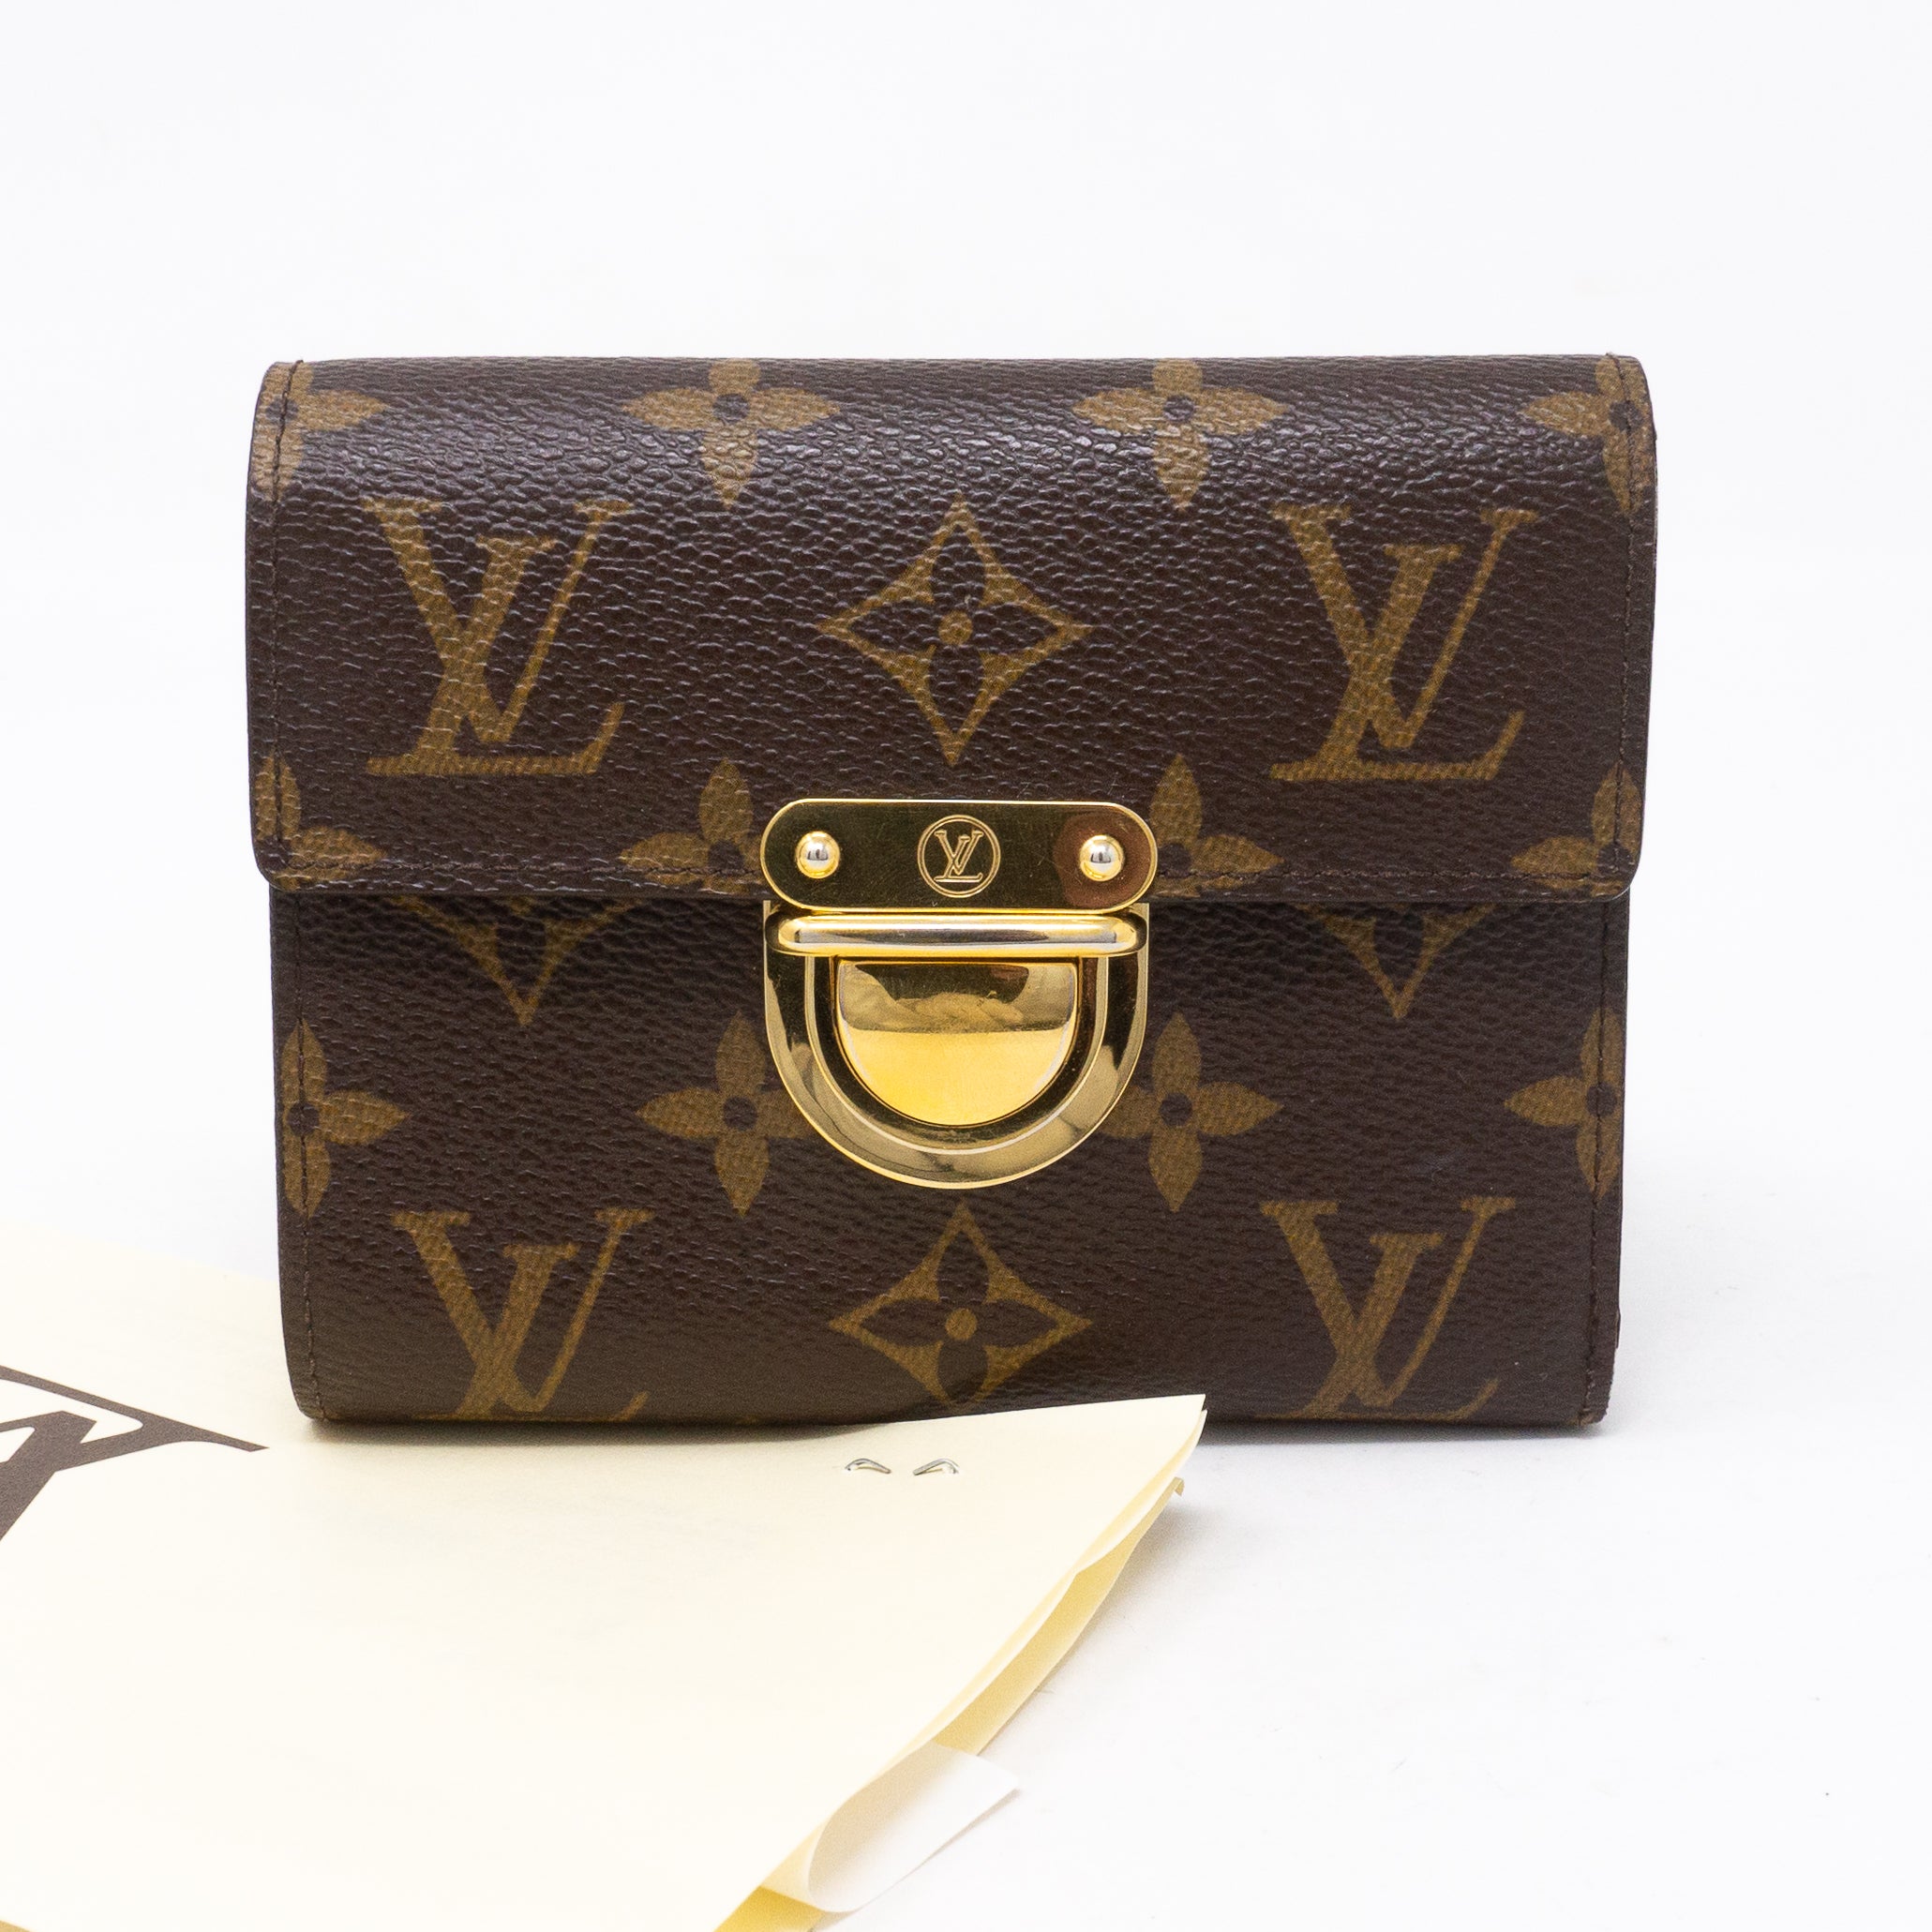 Authentic Louis Vuitton koala monogram walle for Sale in West Covina, CA -  OfferUp